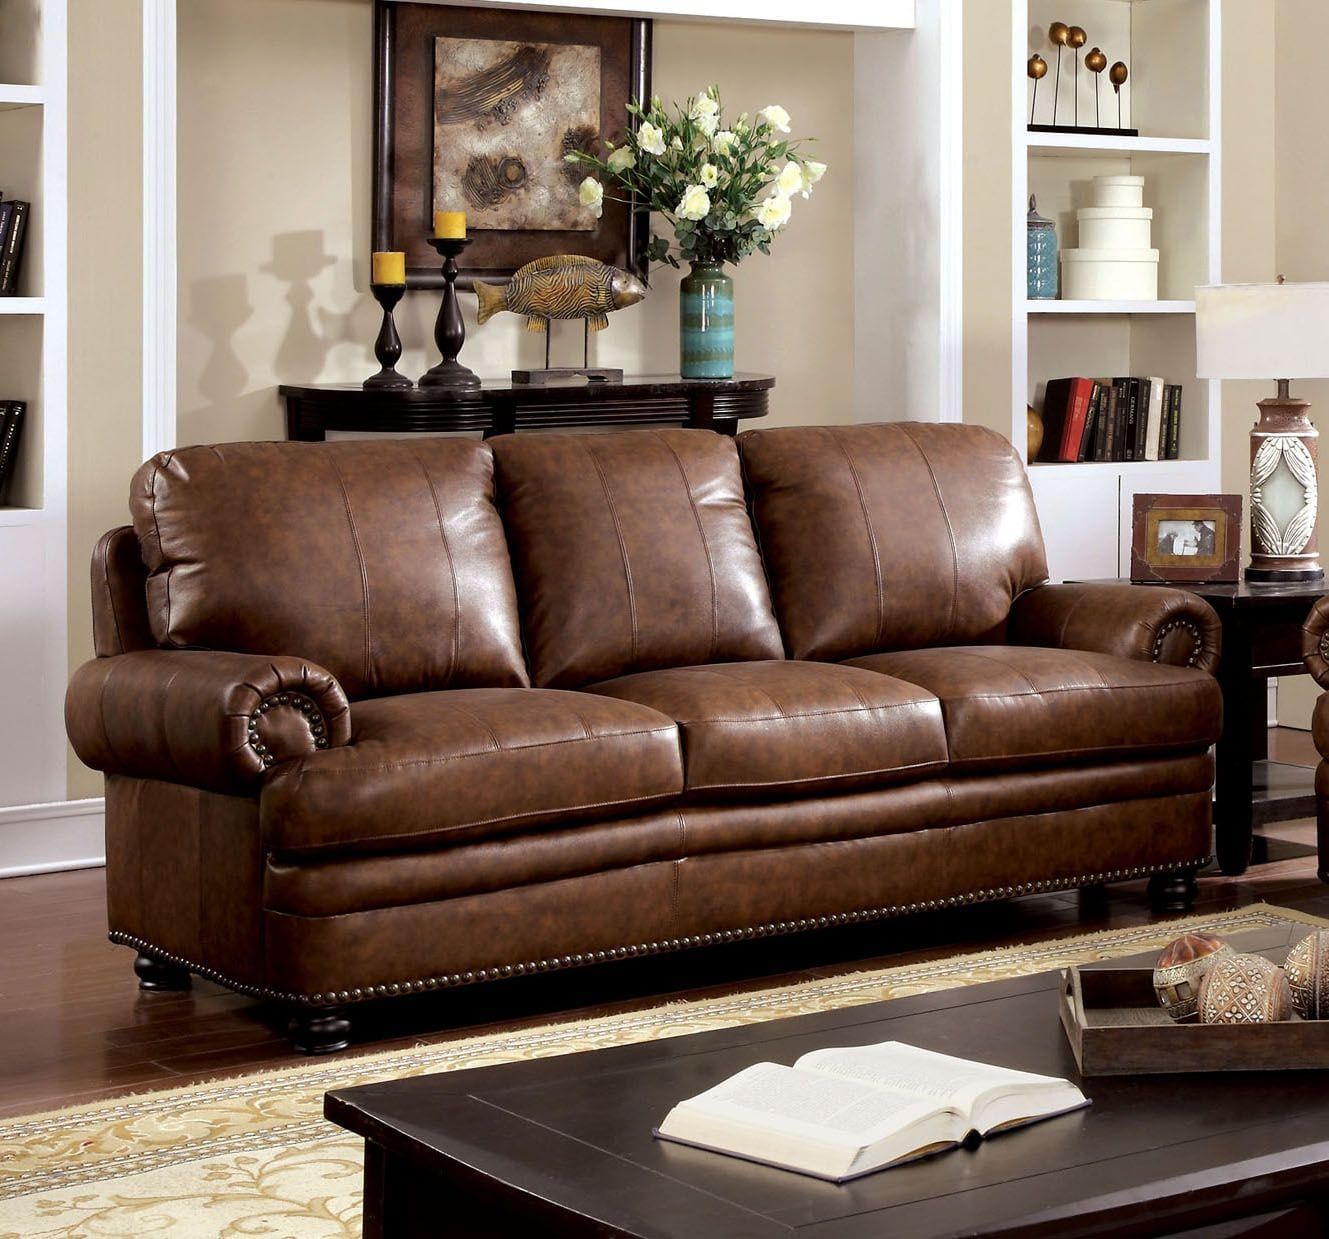 Cm6318 Sf Dark Brown Top Grain Leather Match Sofa Couch – Luchy Amor In Top Grain Leather Loveseats (Gallery 10 of 20)